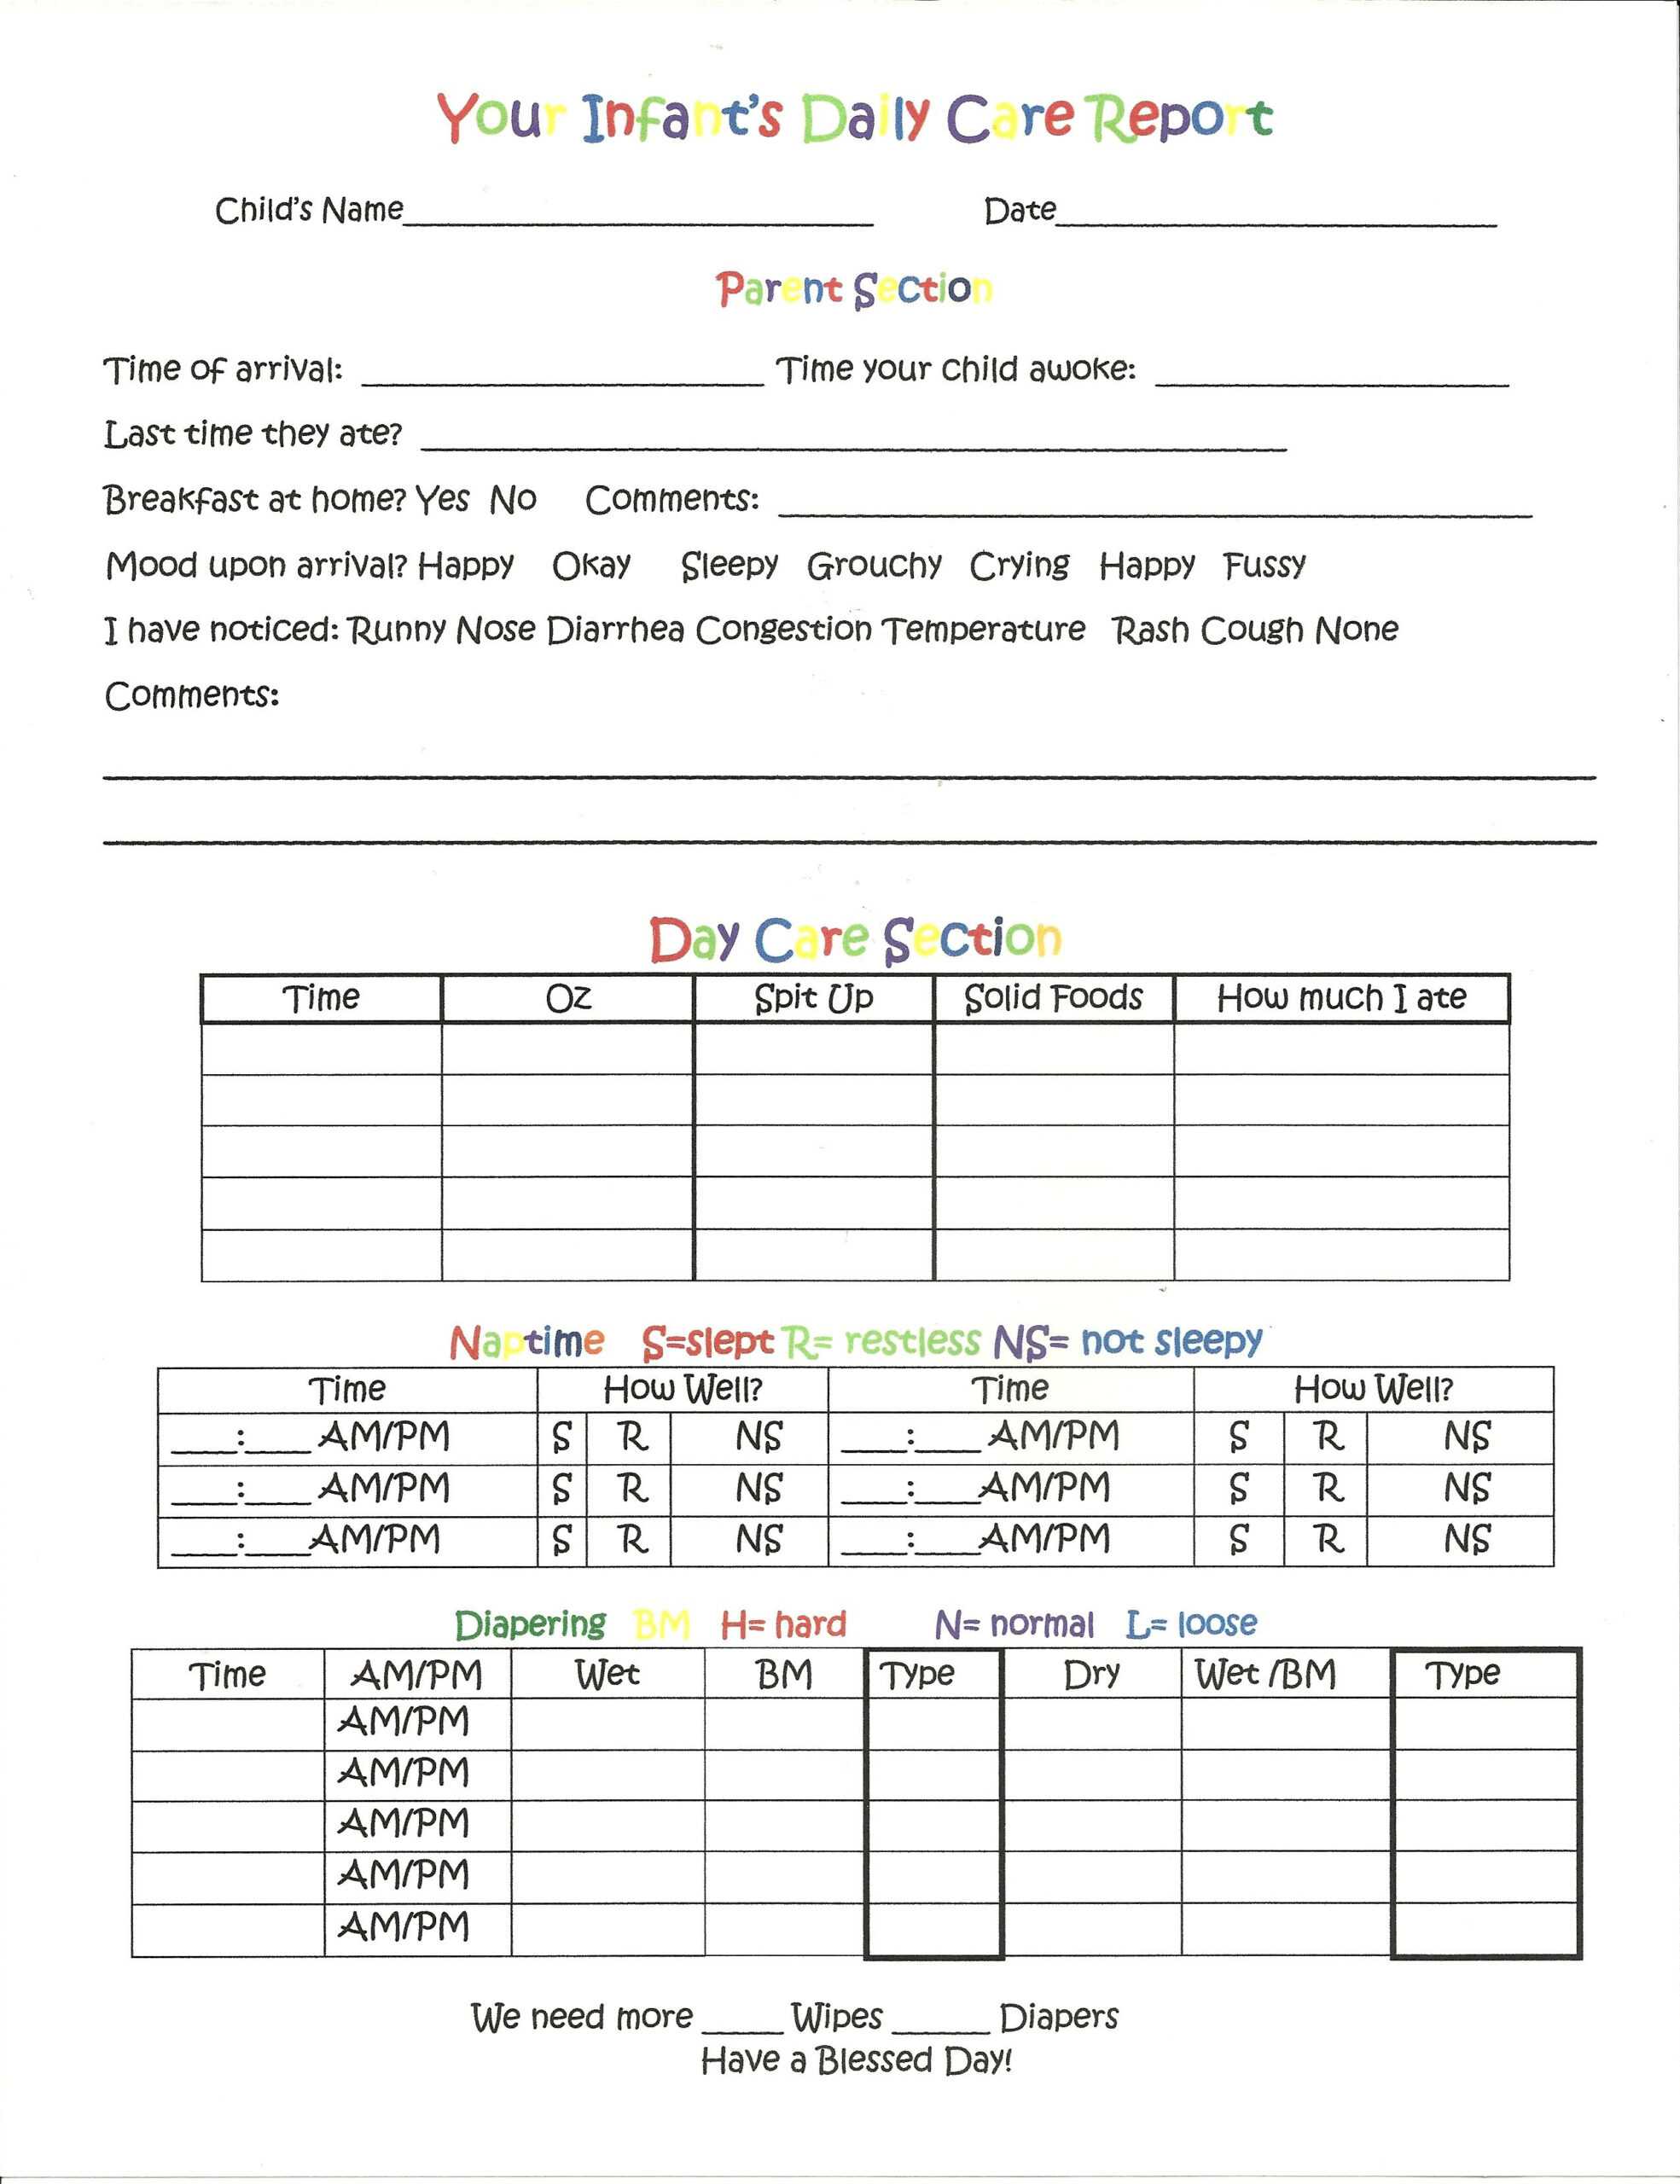 Daily Report For Infants. That I Put Together. | Infant Pertaining To Daycare Infant Daily Report Template